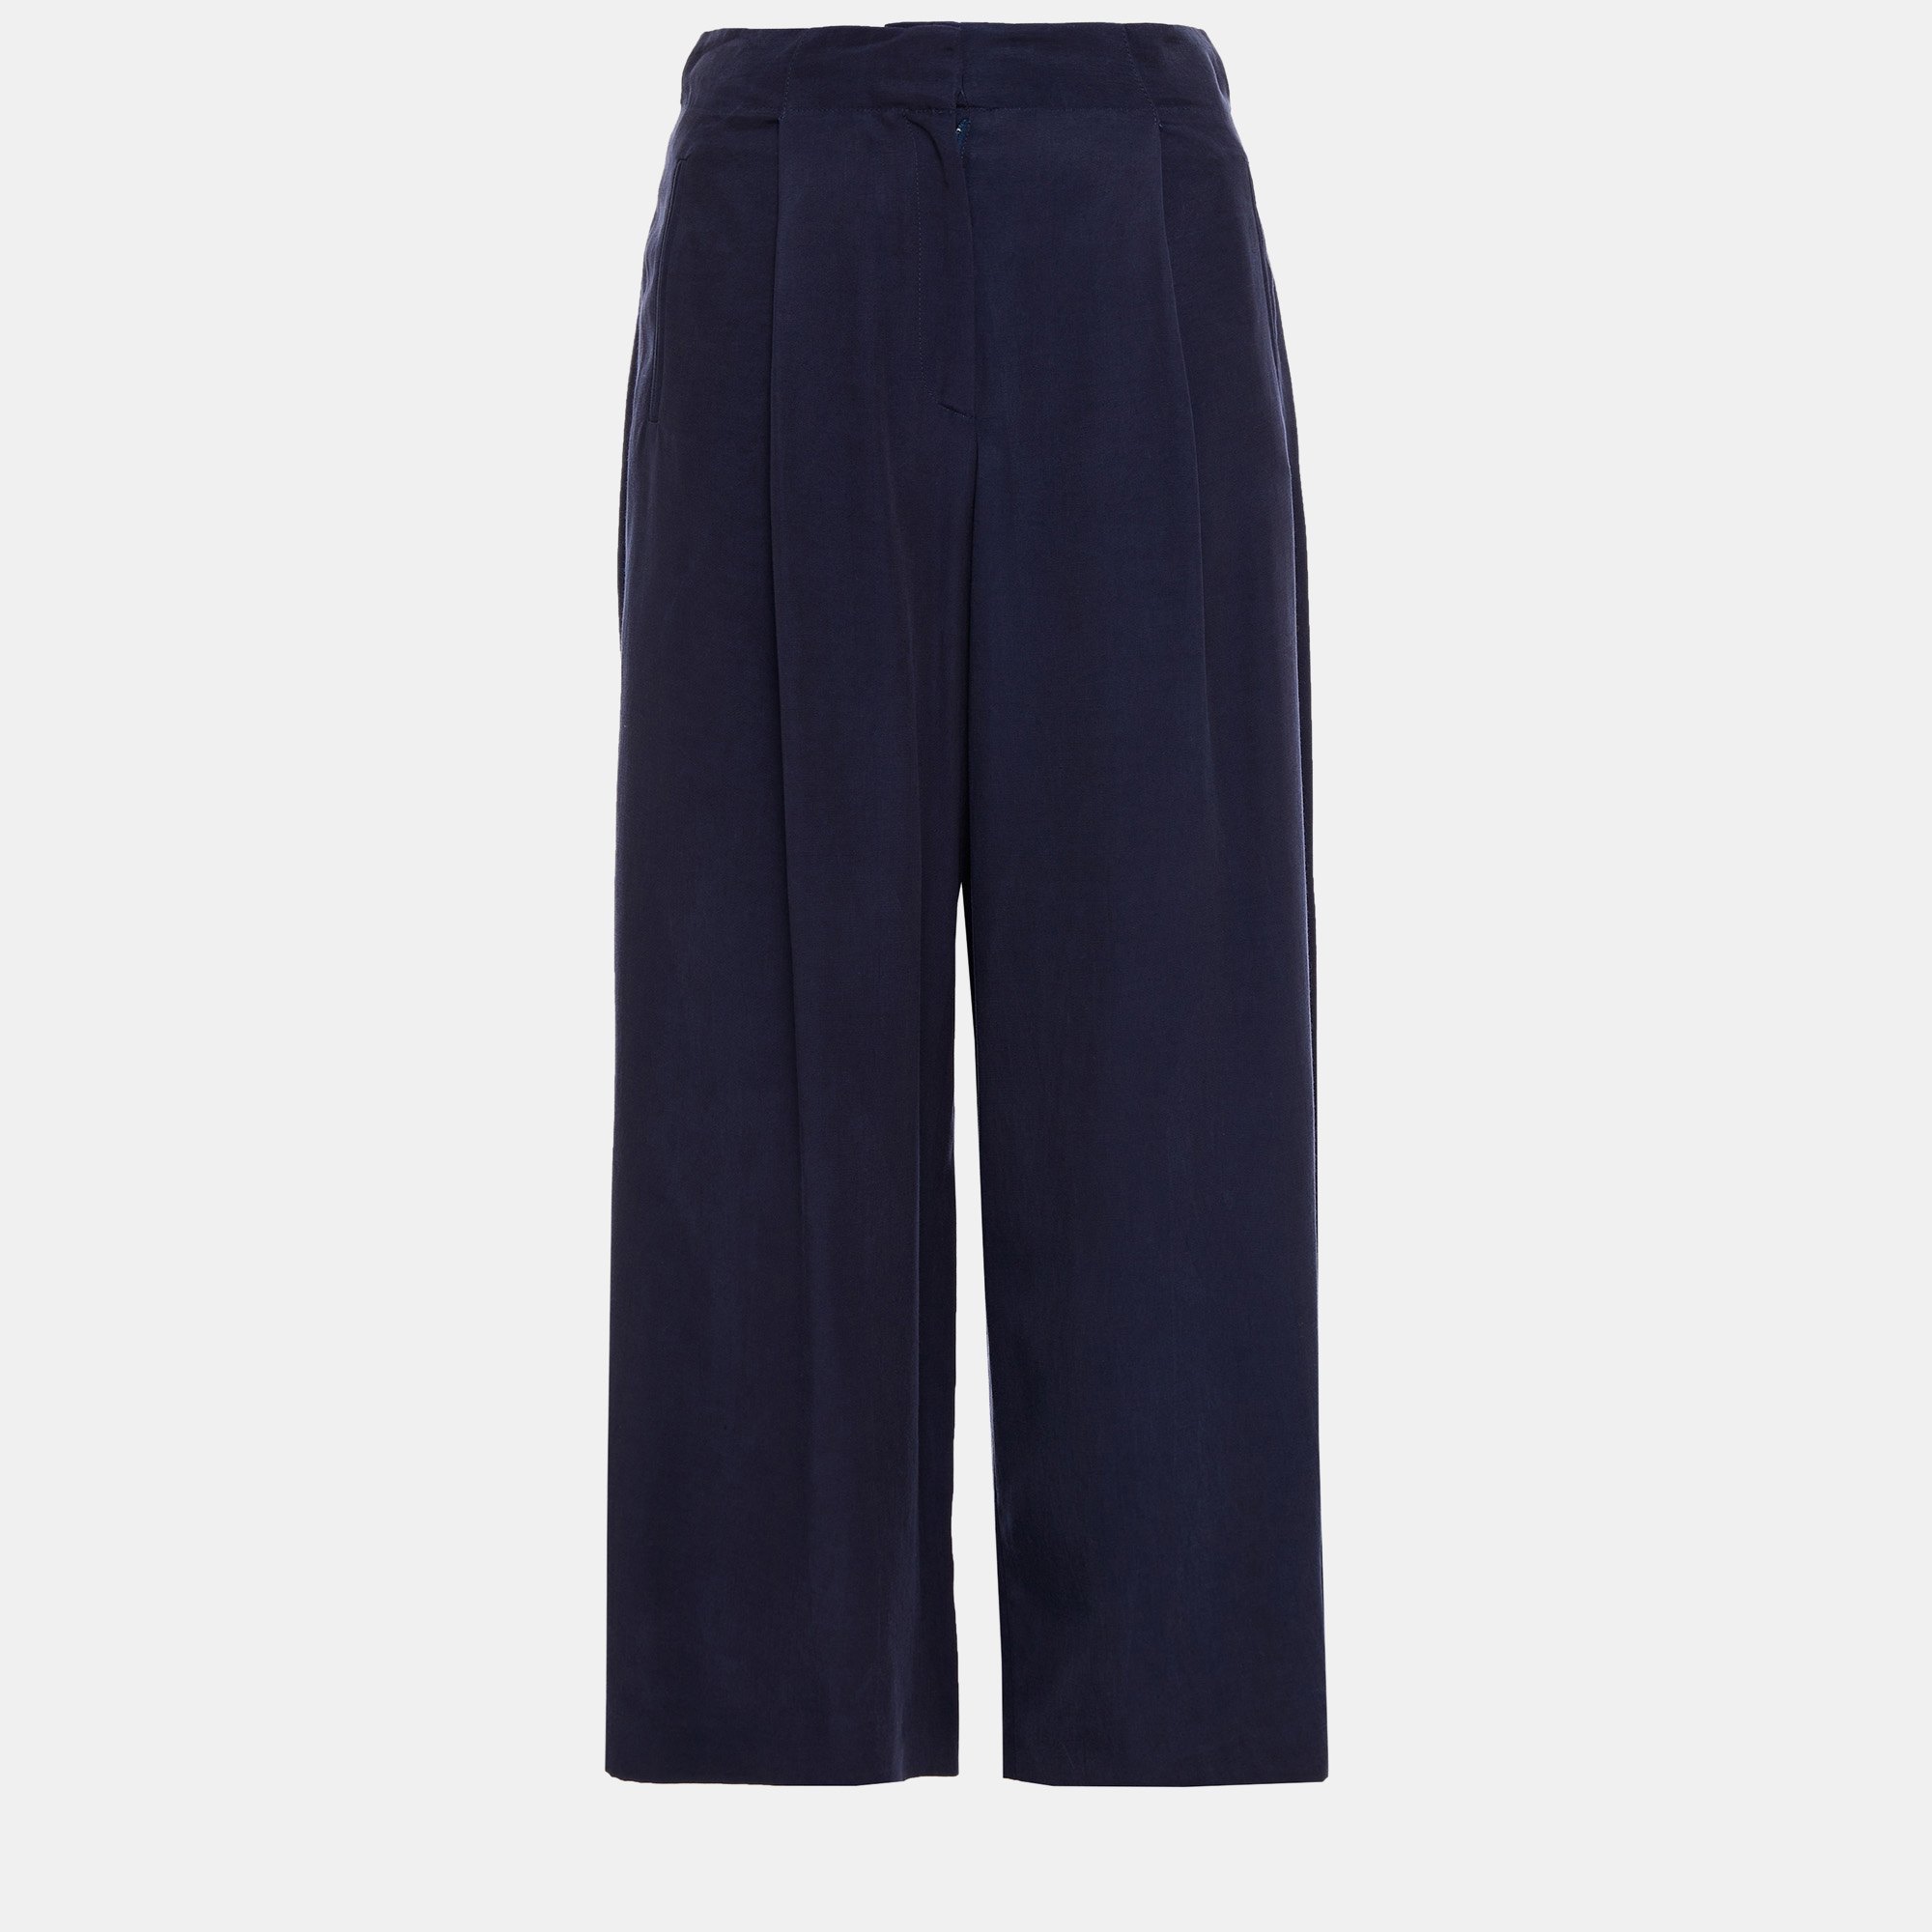 Pre-owned Etro Navy Blue Viscose Culottes S (it 38)